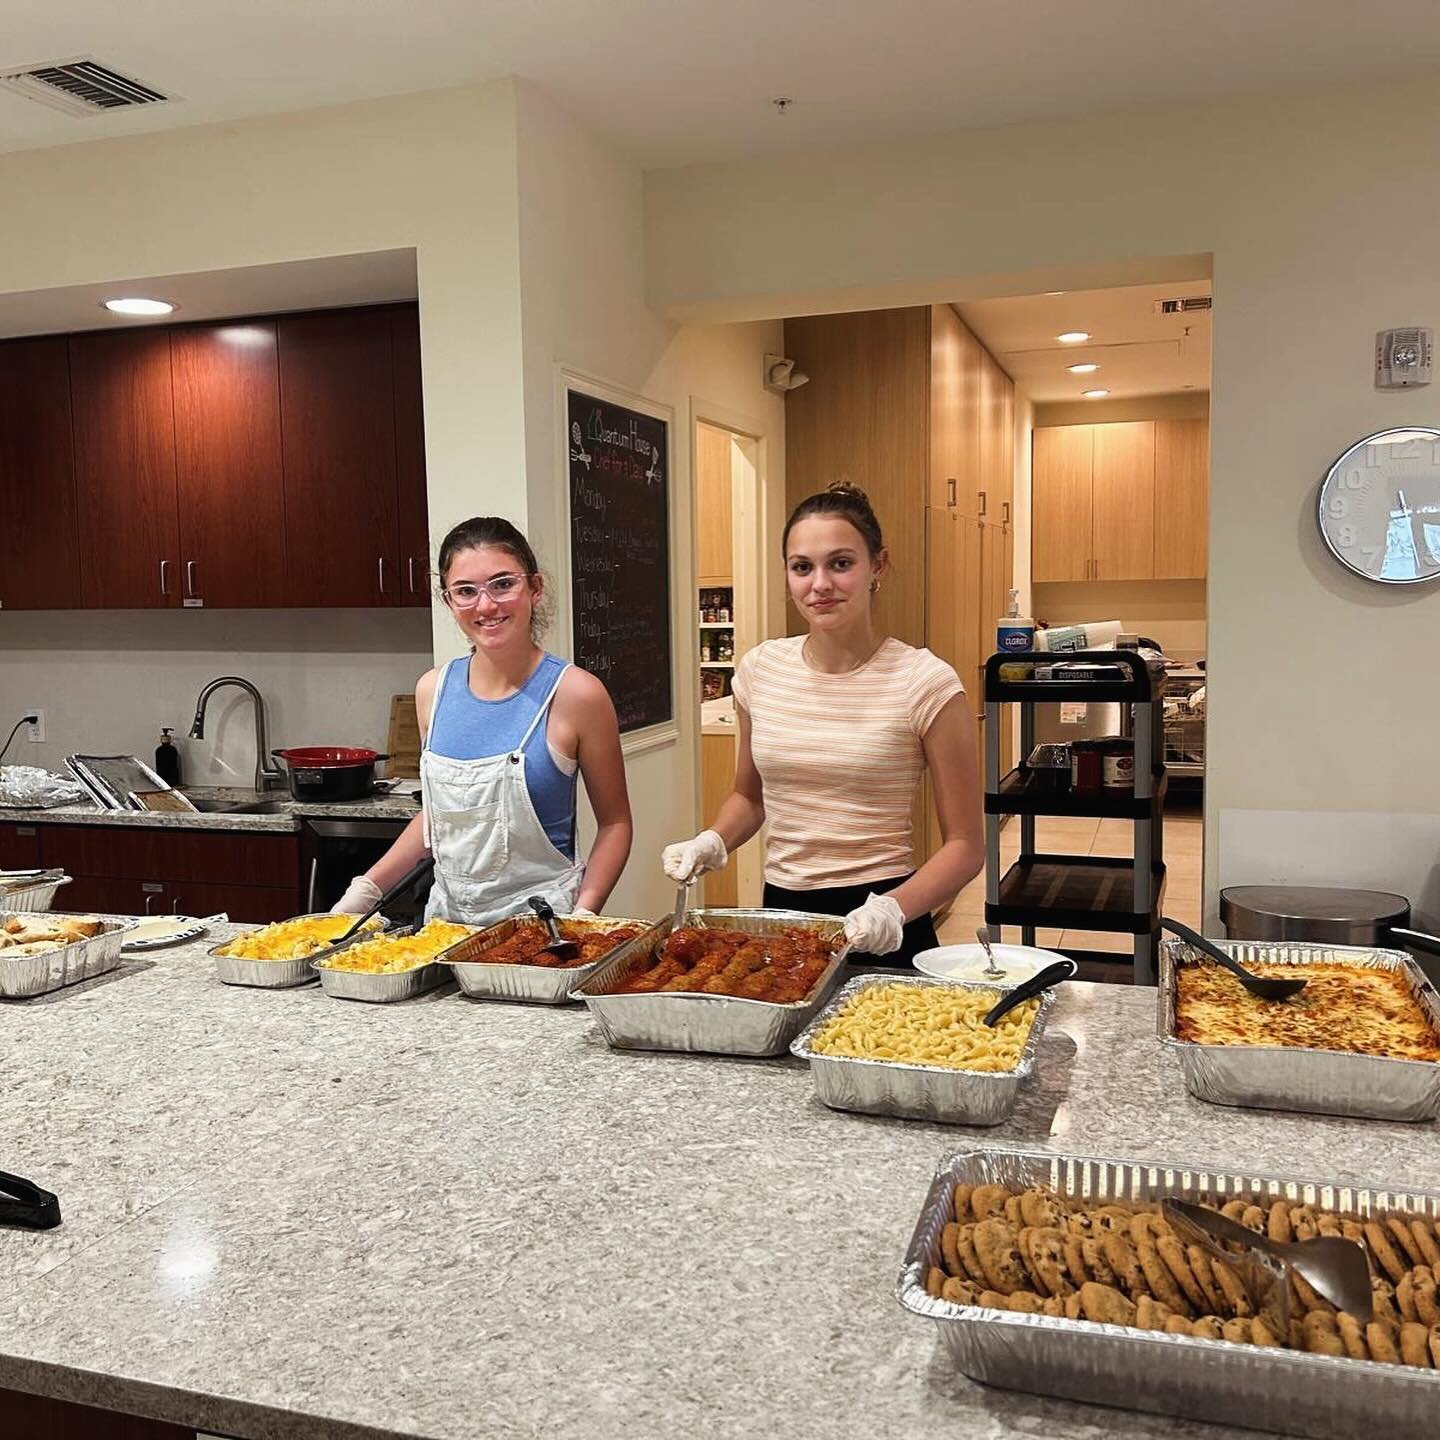 🔙✨ Throwback to Marin R. and Audrey H.'s heartwarming adventure at Quantum House last month! 

🍳🏠 These NJHs superstars turned up the heat in the kitchen, whipping up delicious meals for families in need. 

🌟💖 Let's rewind and relive the magic o